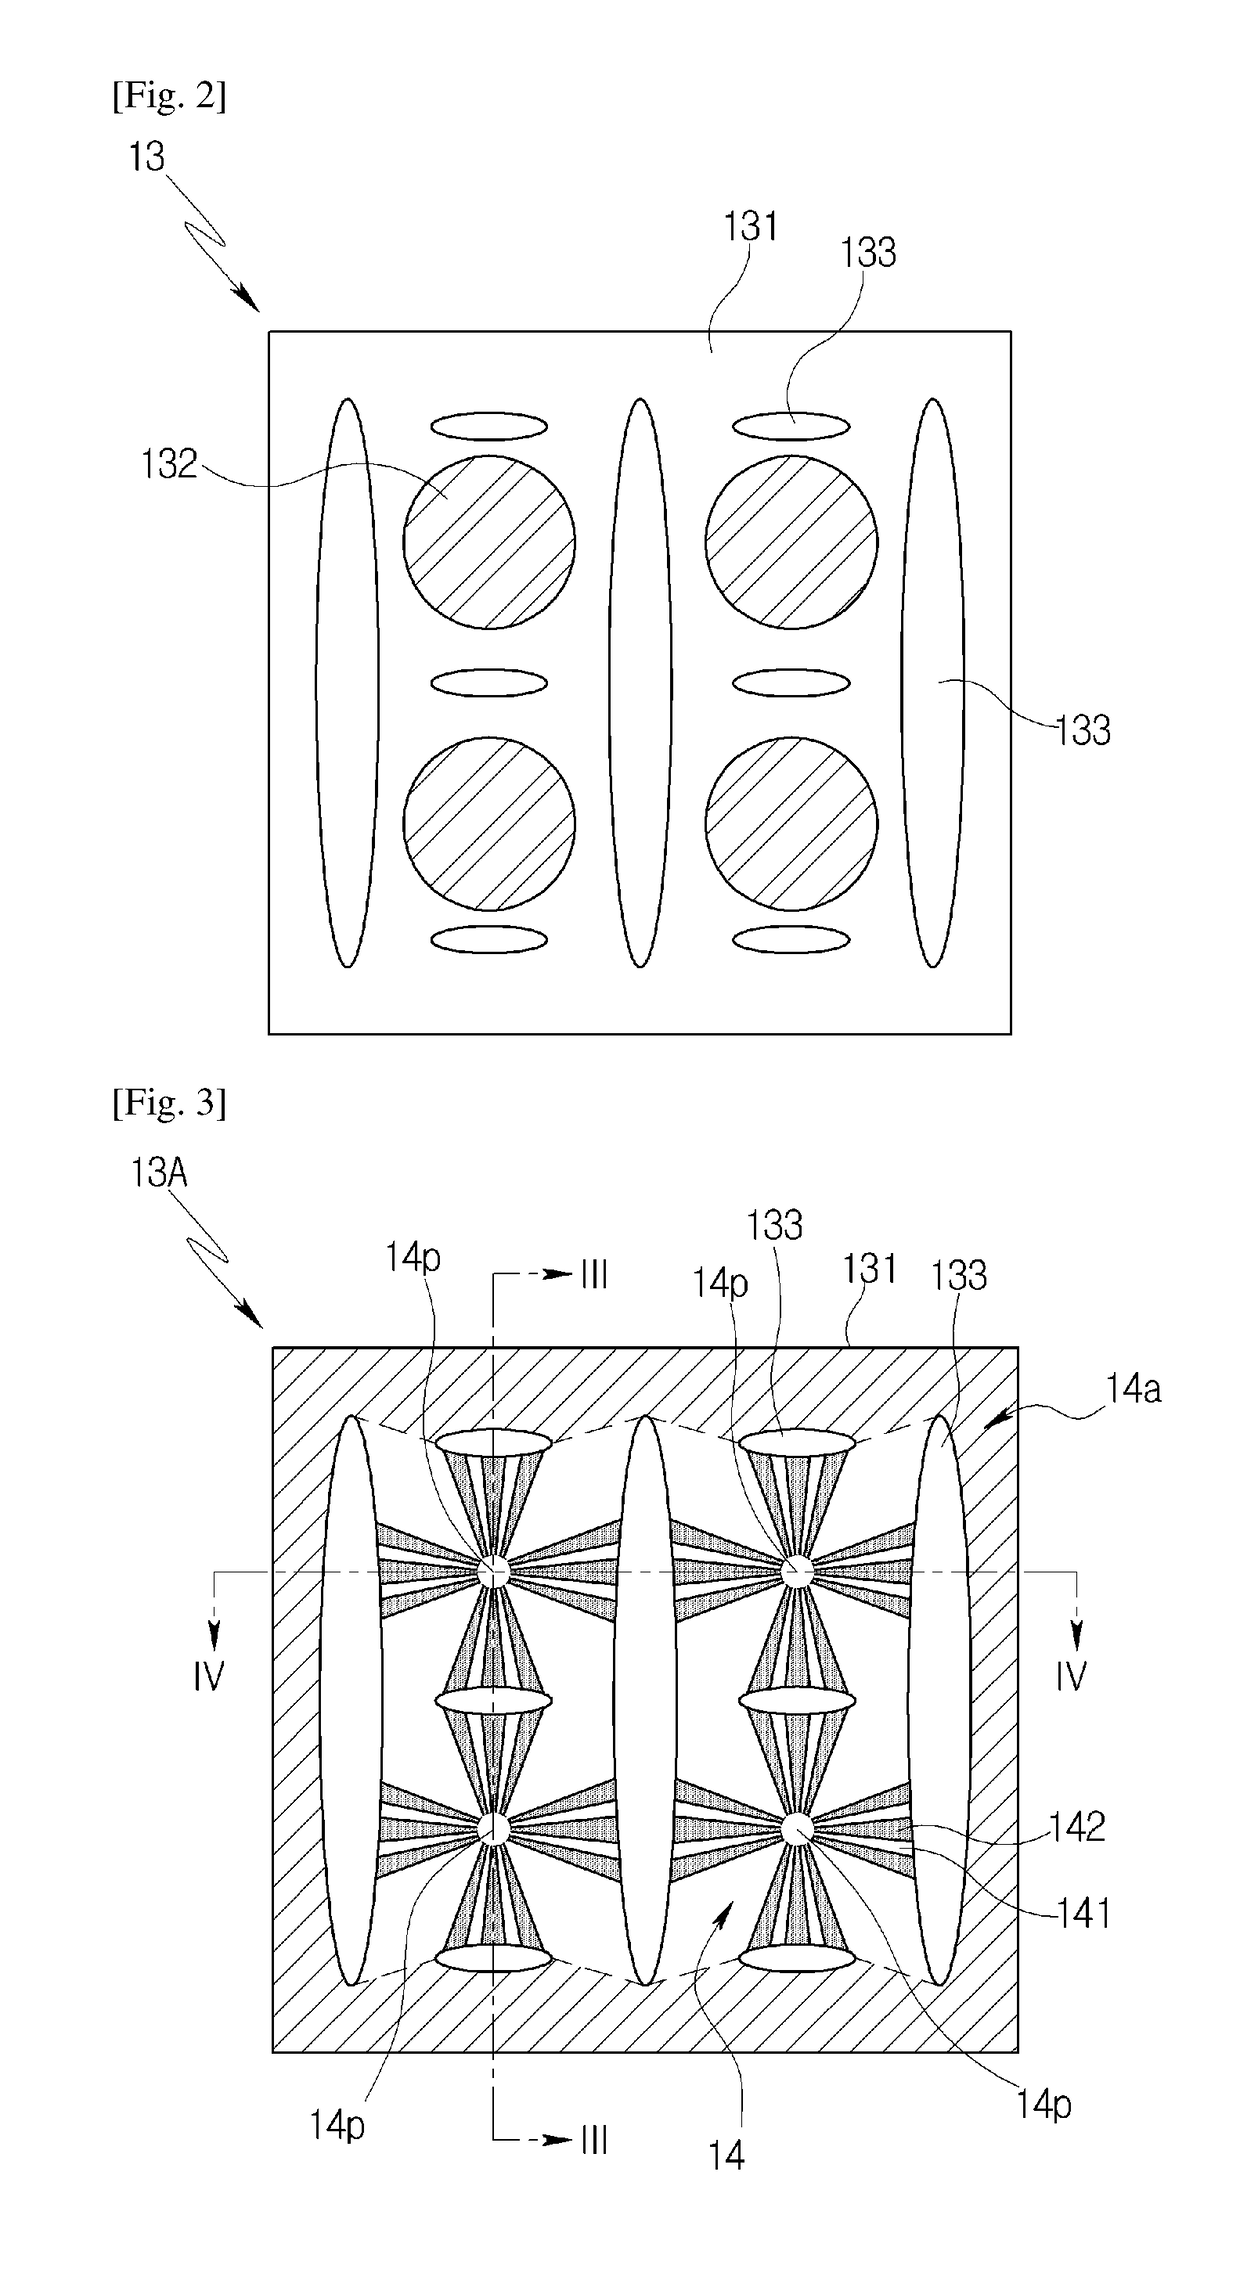 Air purifying apparatus using ultra violet light emitting diode